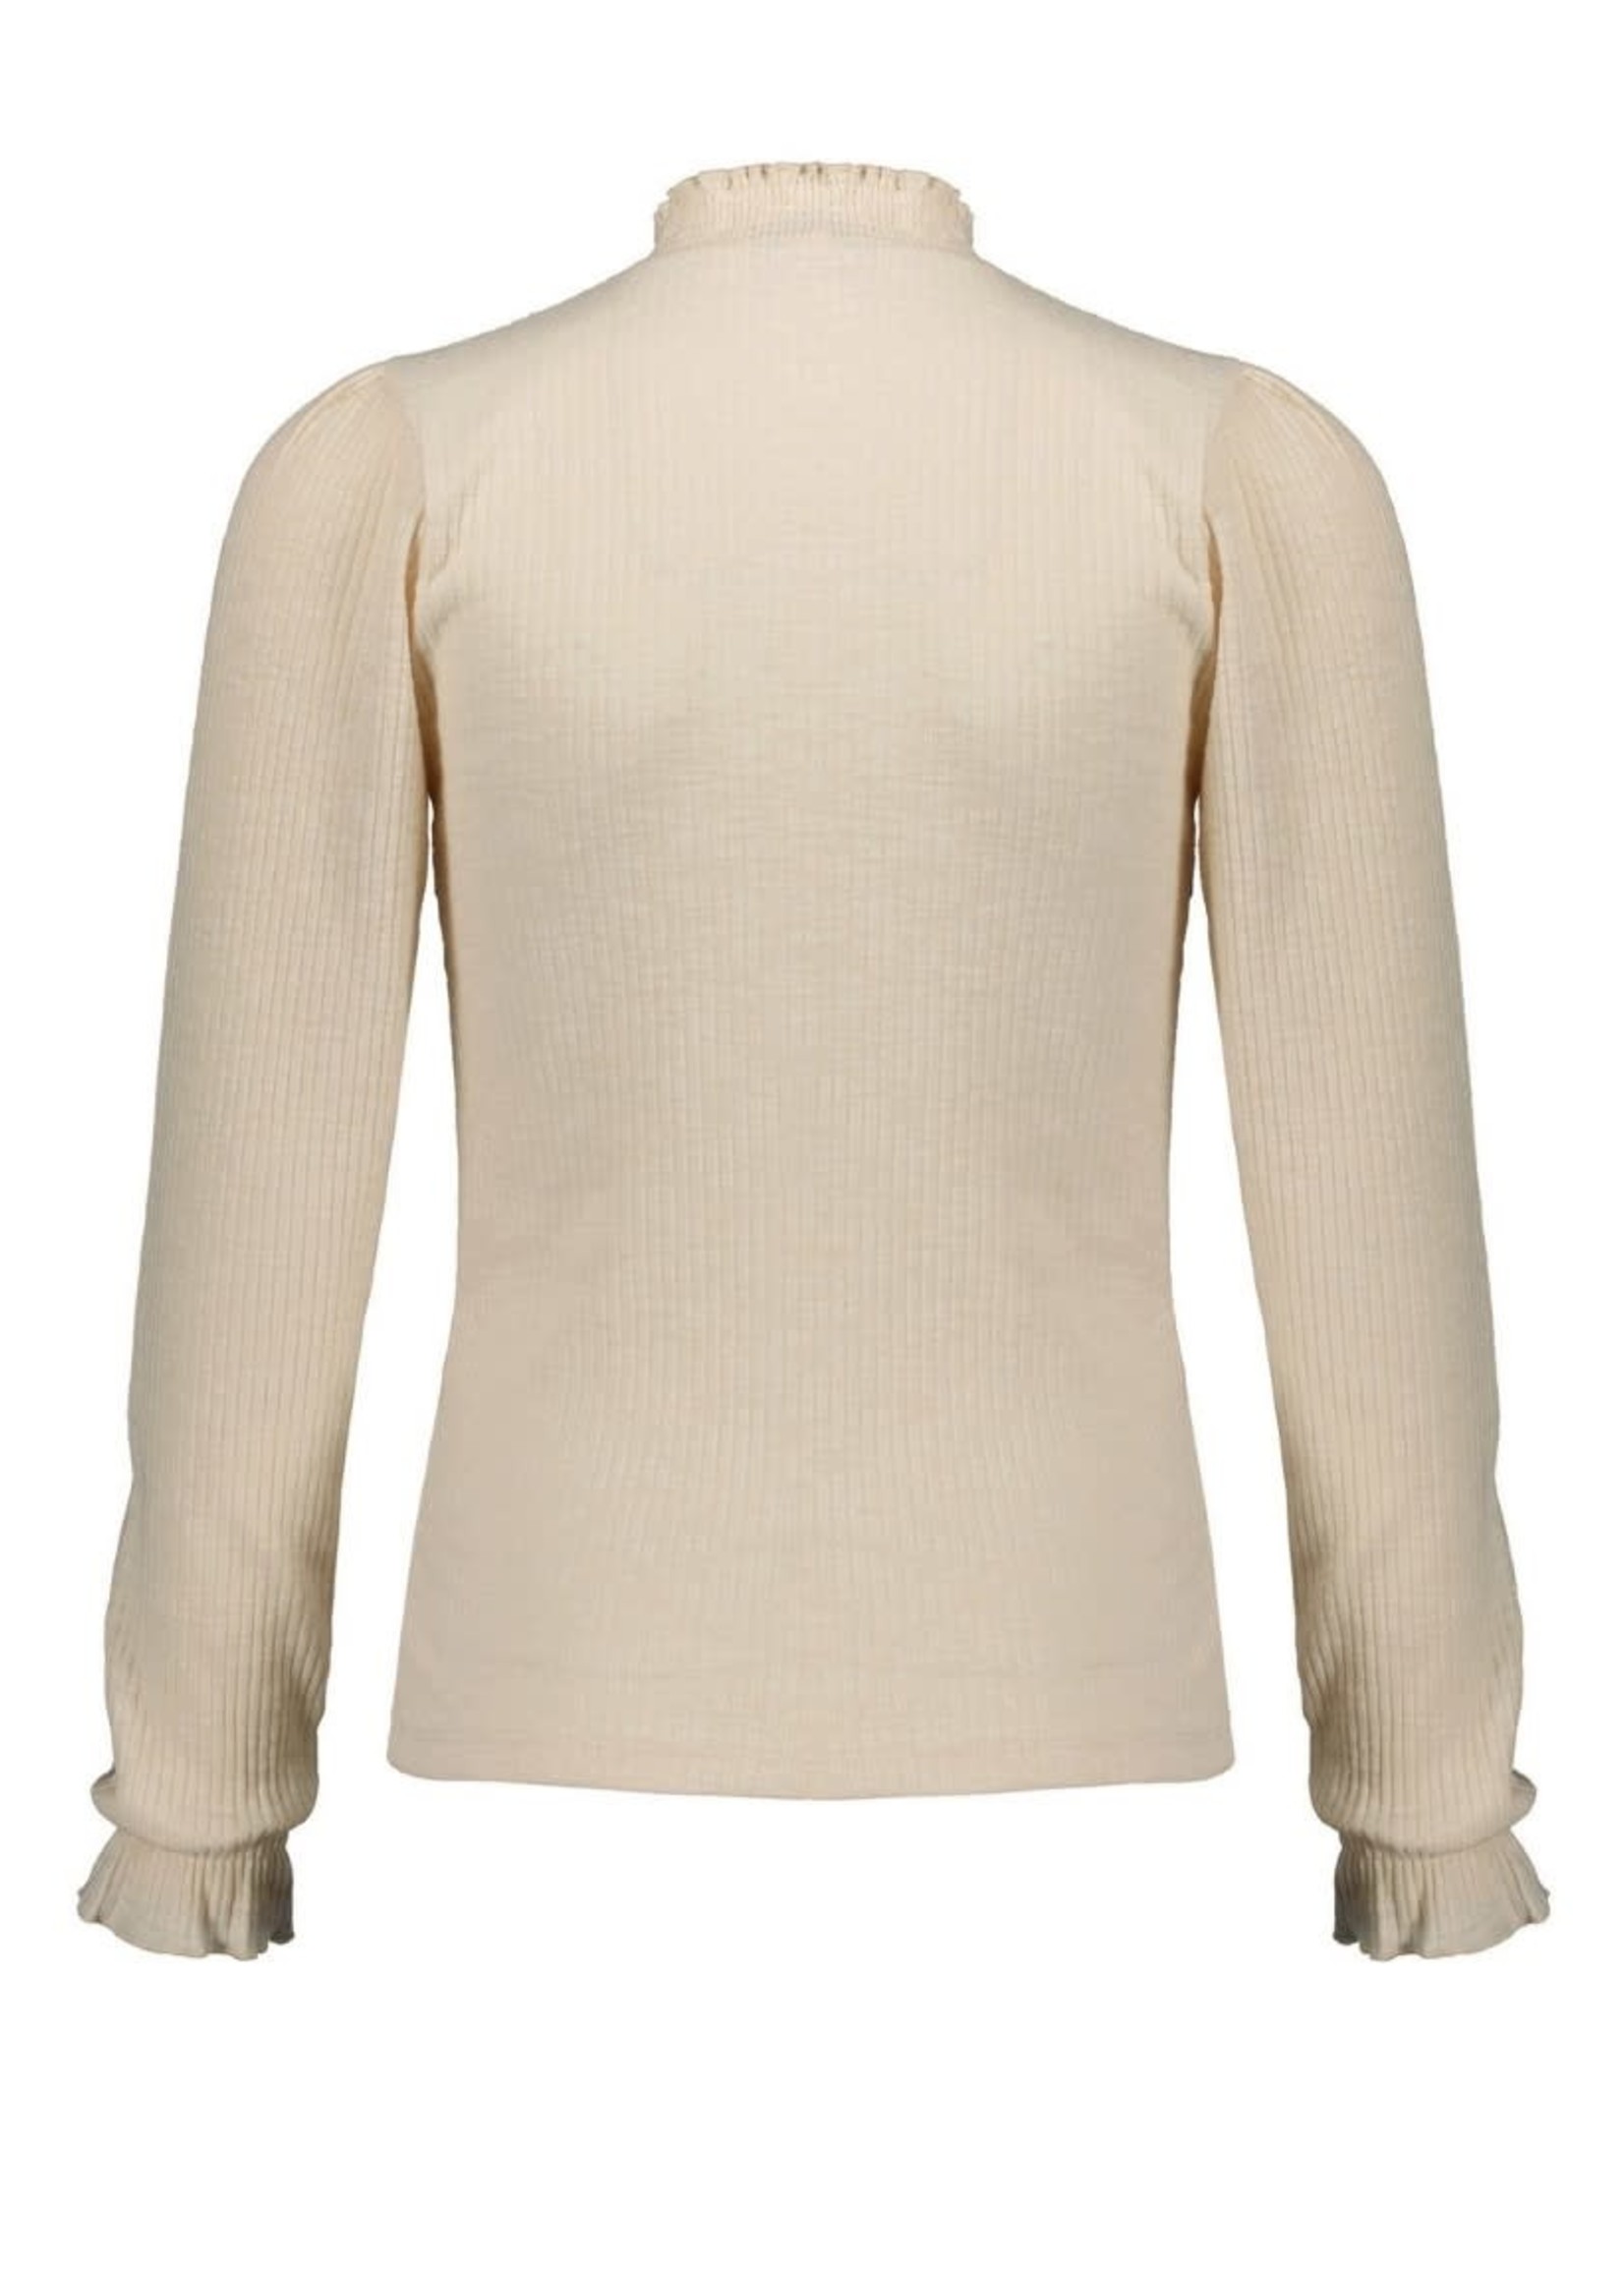 Nobell Nobell Kooka melange rib jersey puffed sleeved top+smock at neck and sleeve end Q208-3404 Pearled Ivory